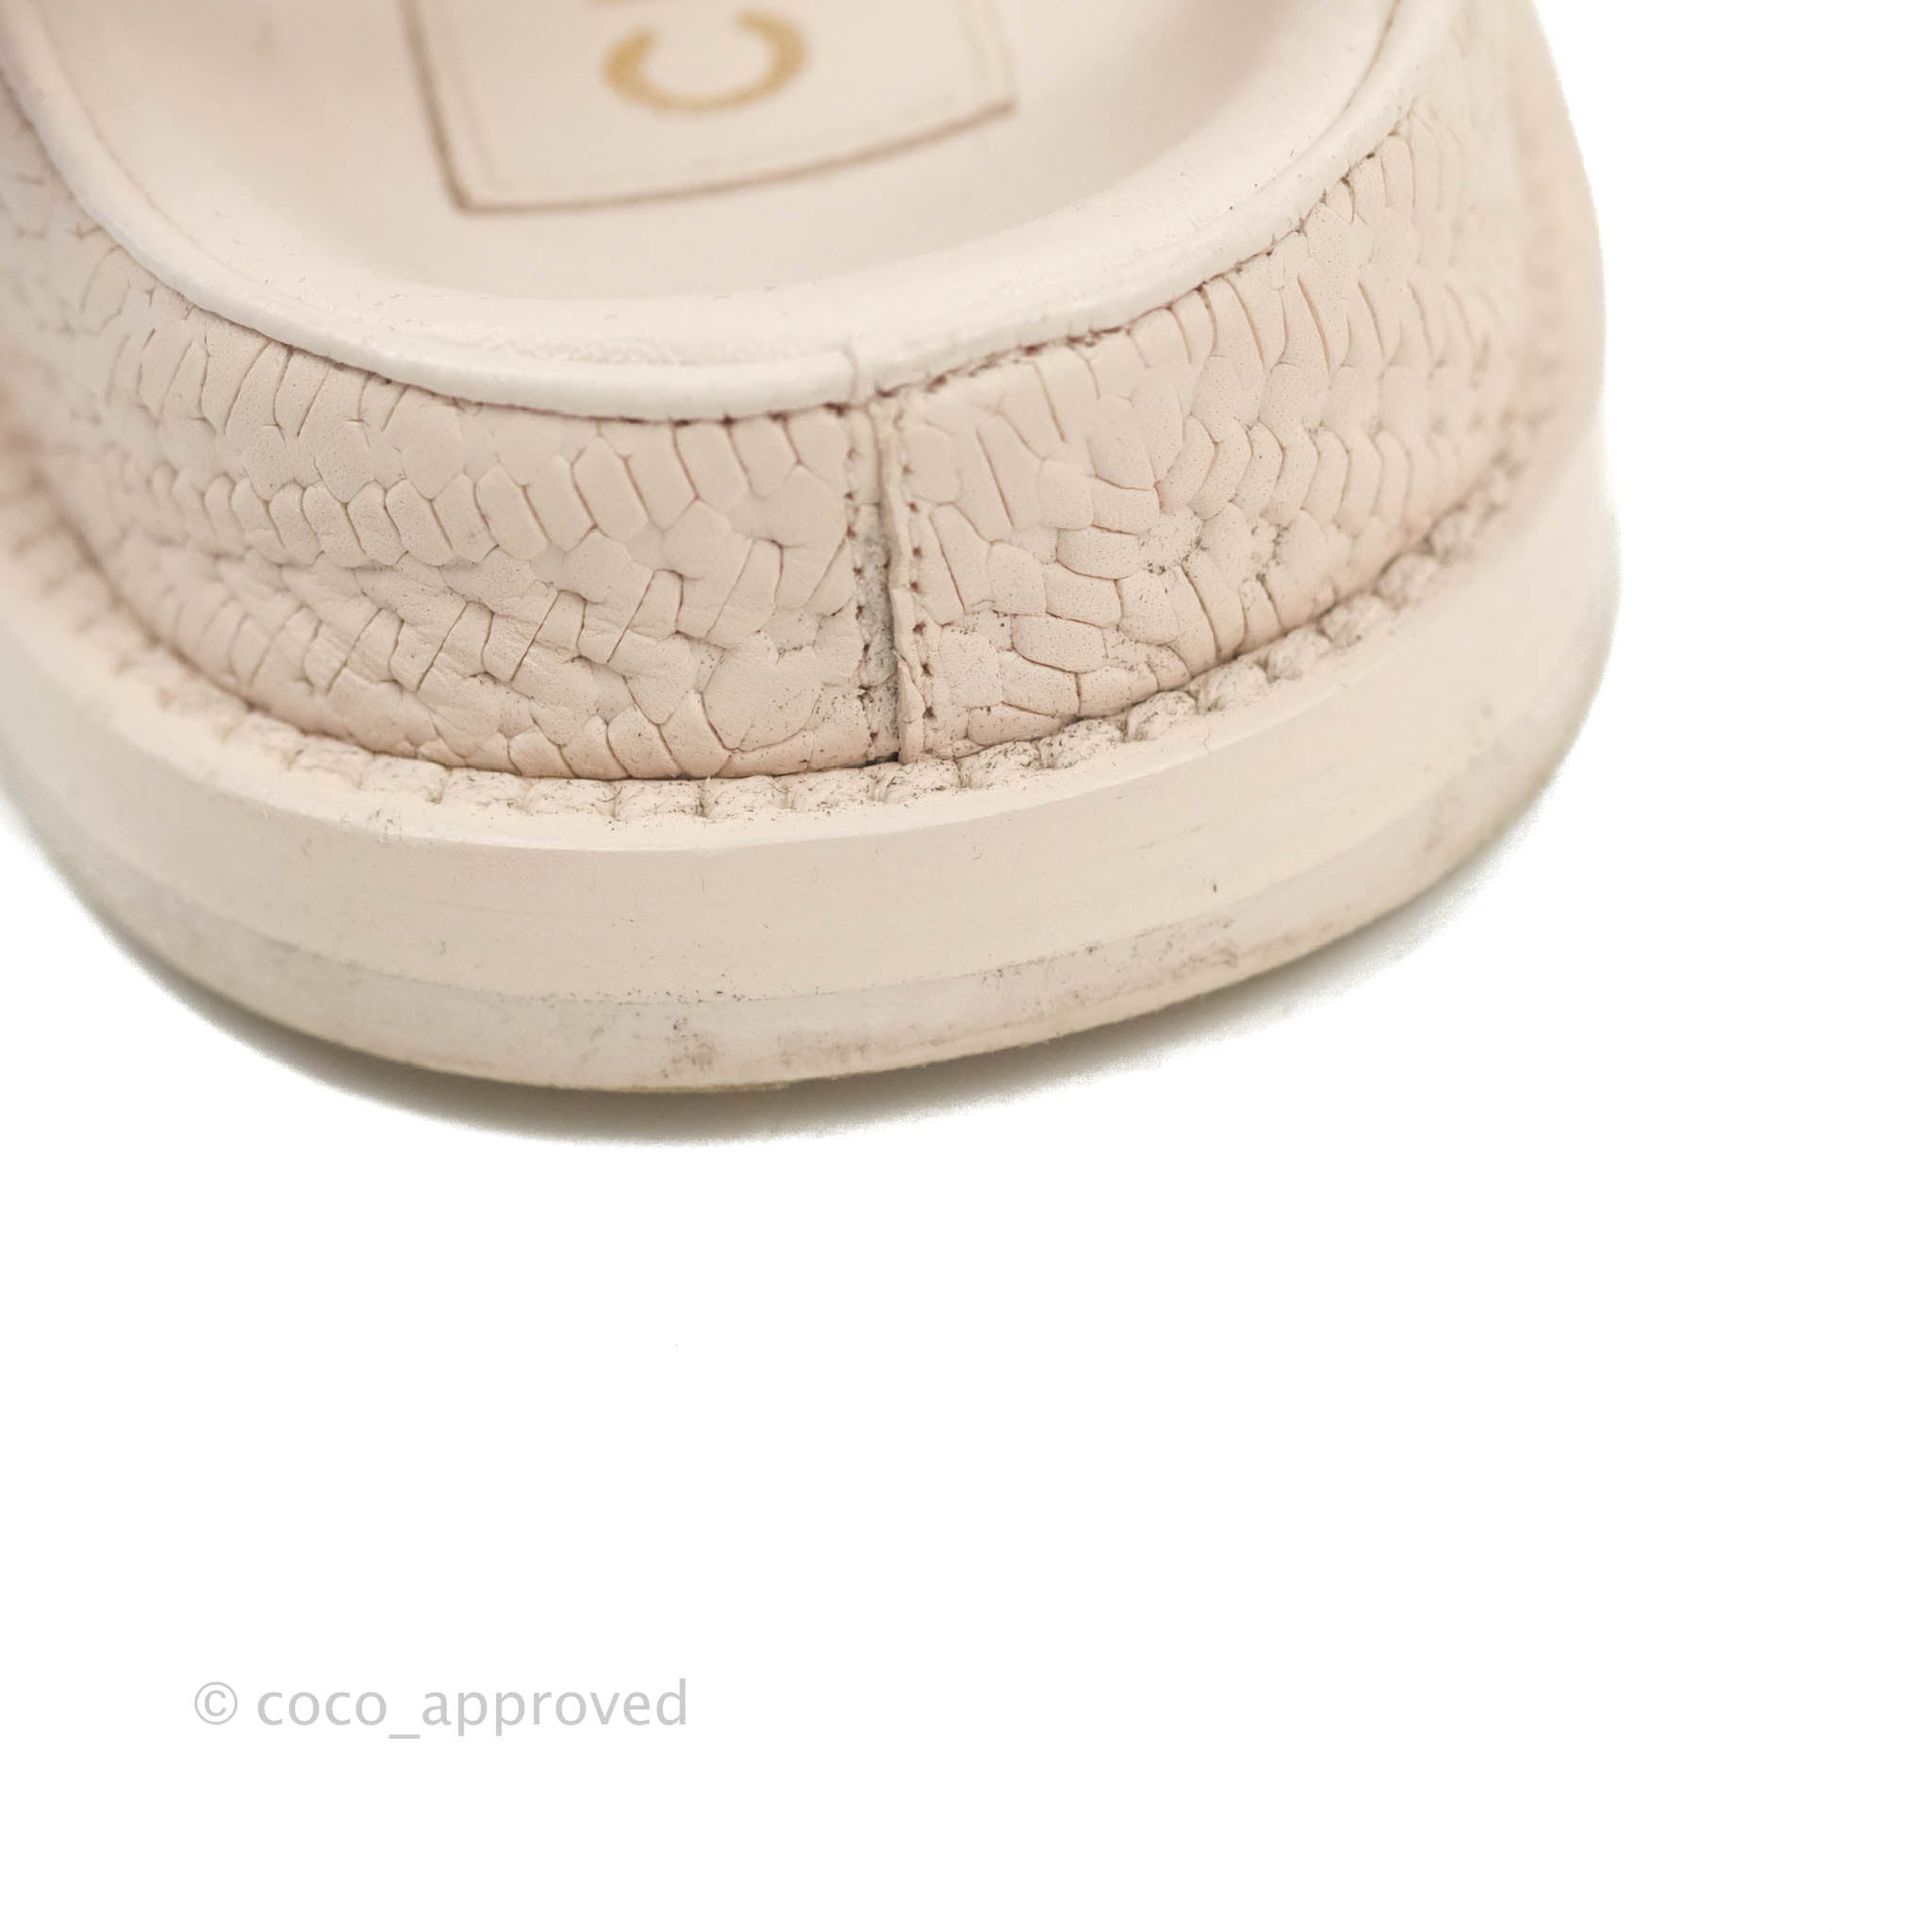 Chanel Dad Sandals Medallion Light Pink Size 37 – Coco Approved Studio